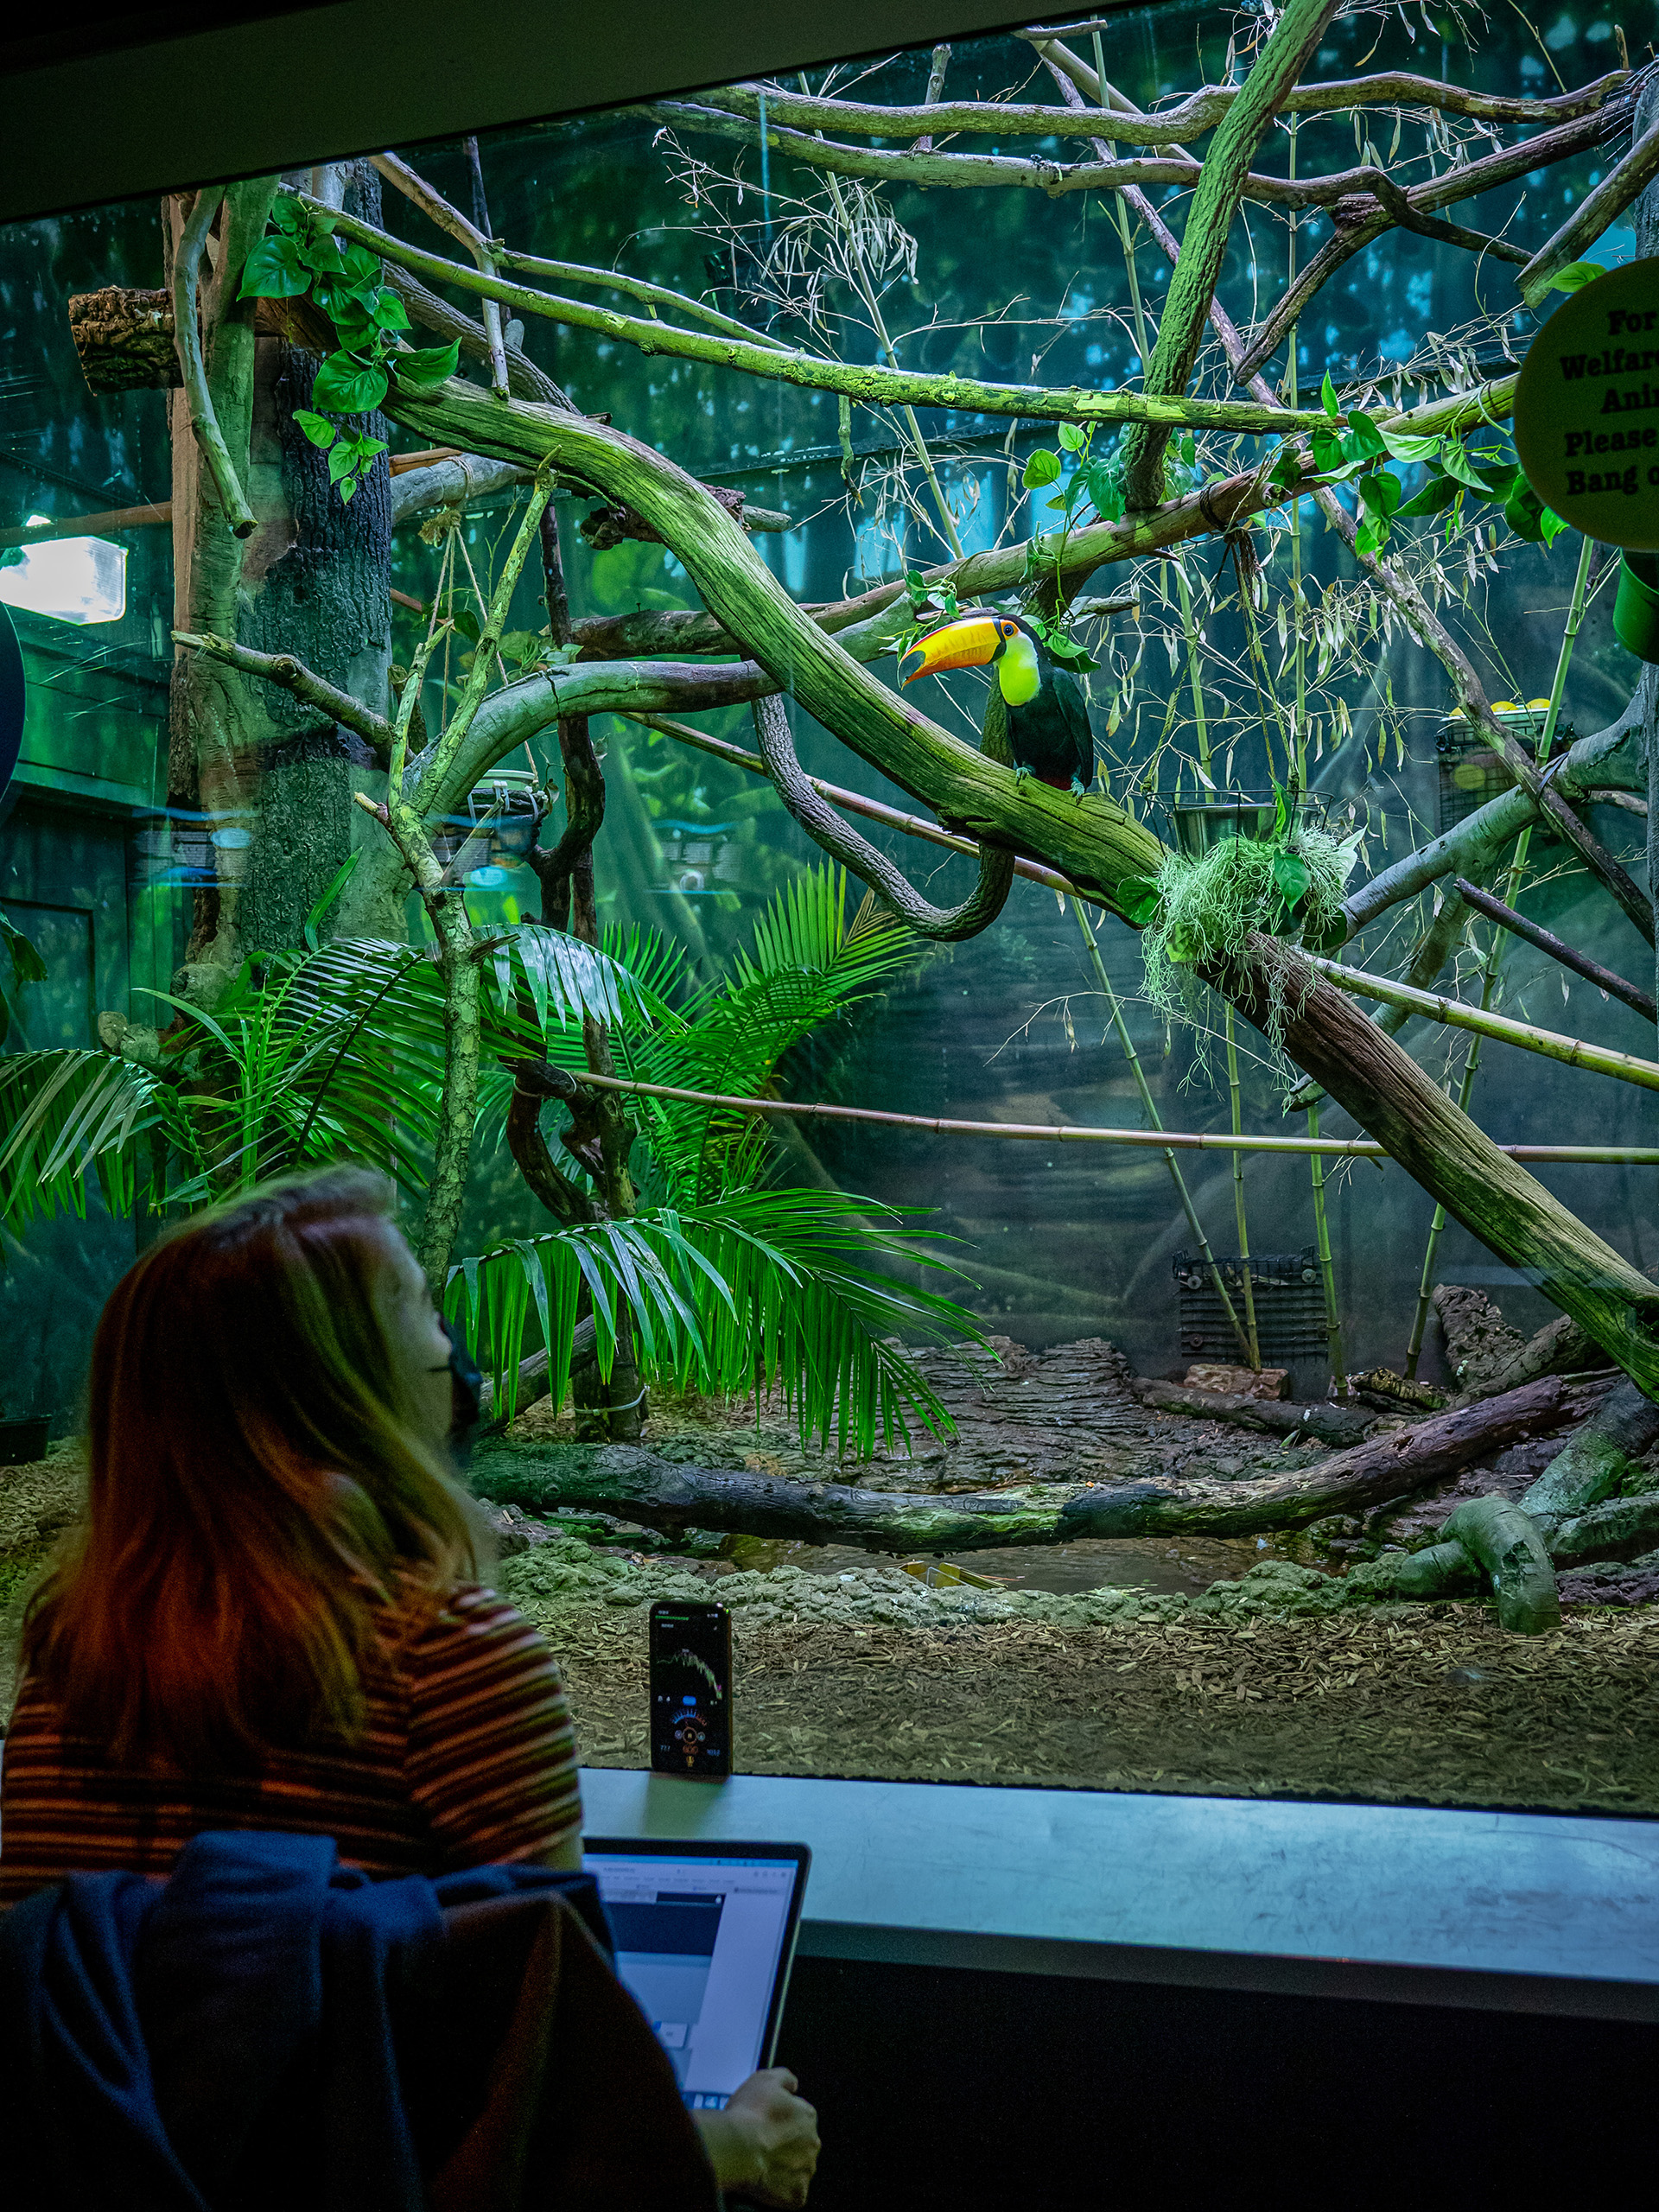 Kristina Ollo watching a toucan behind glass